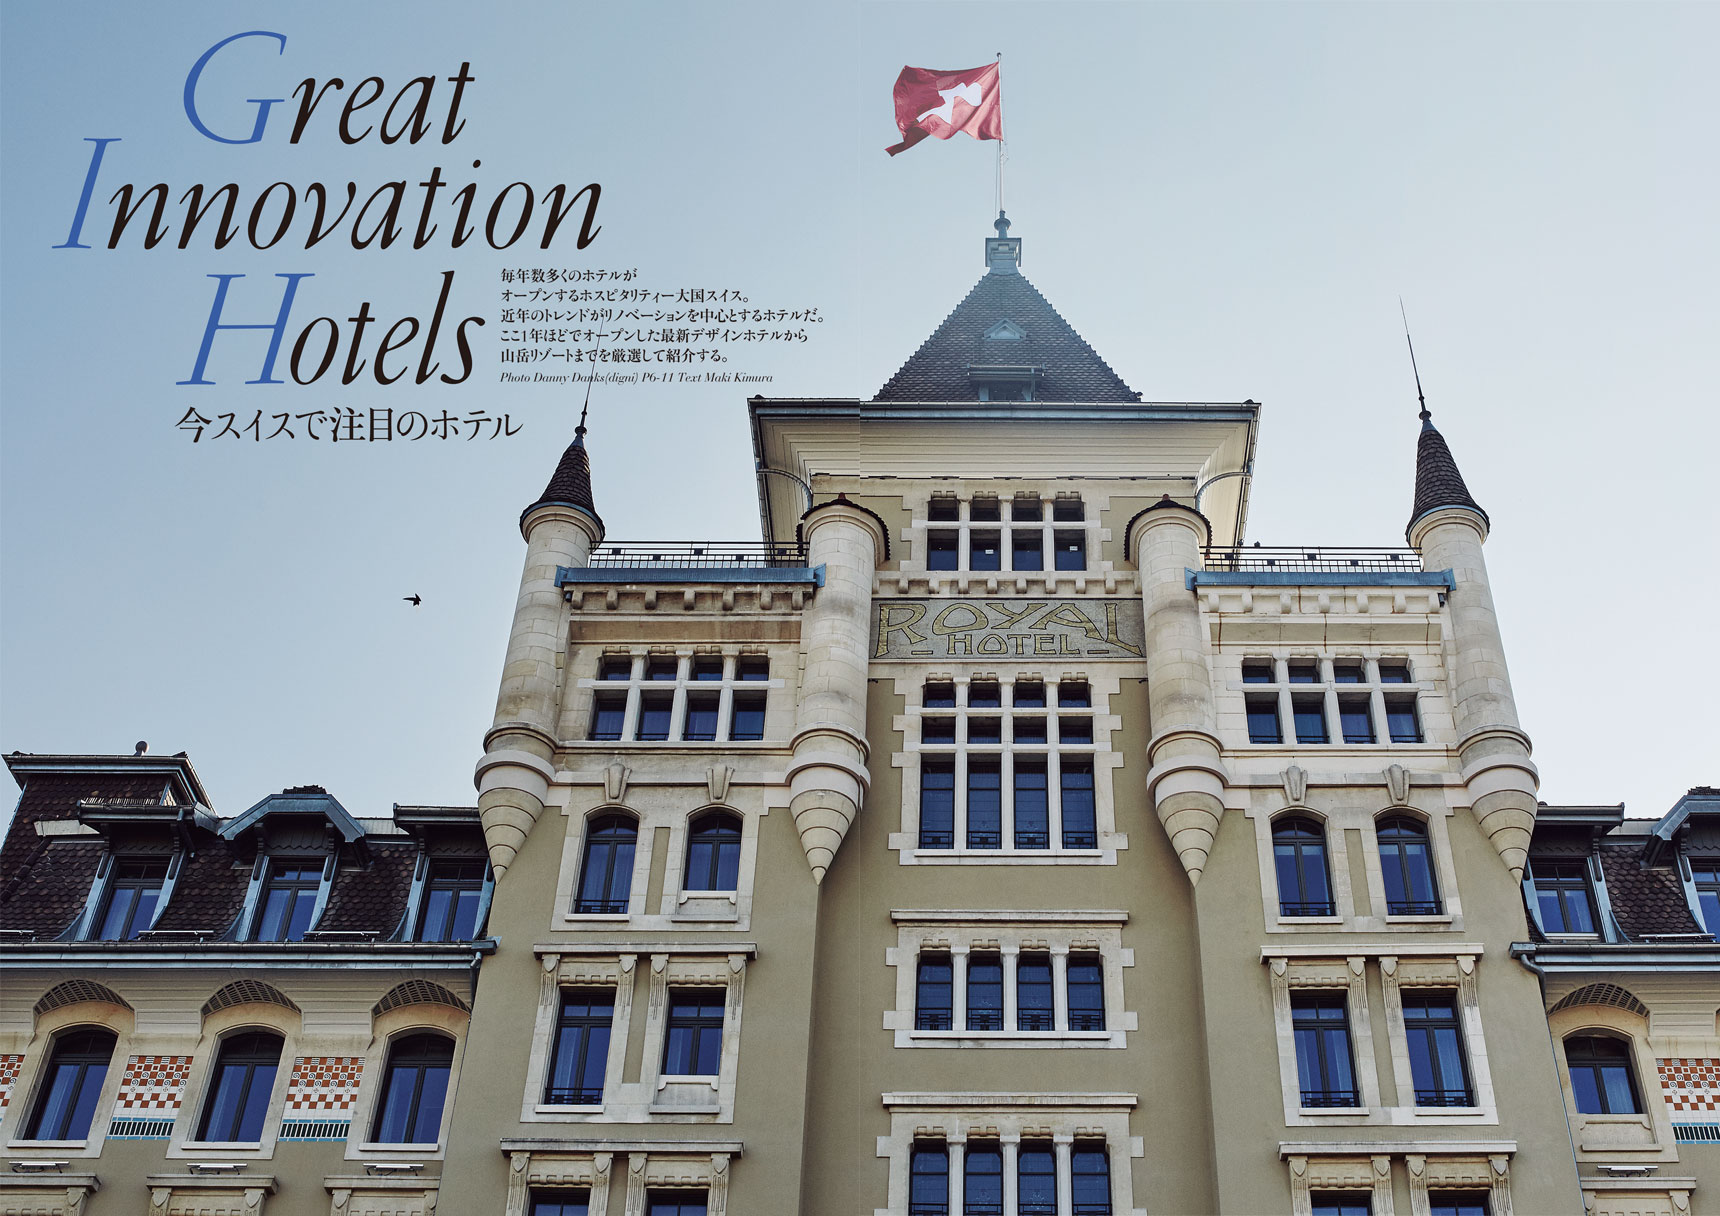 Great Innovation Hotels